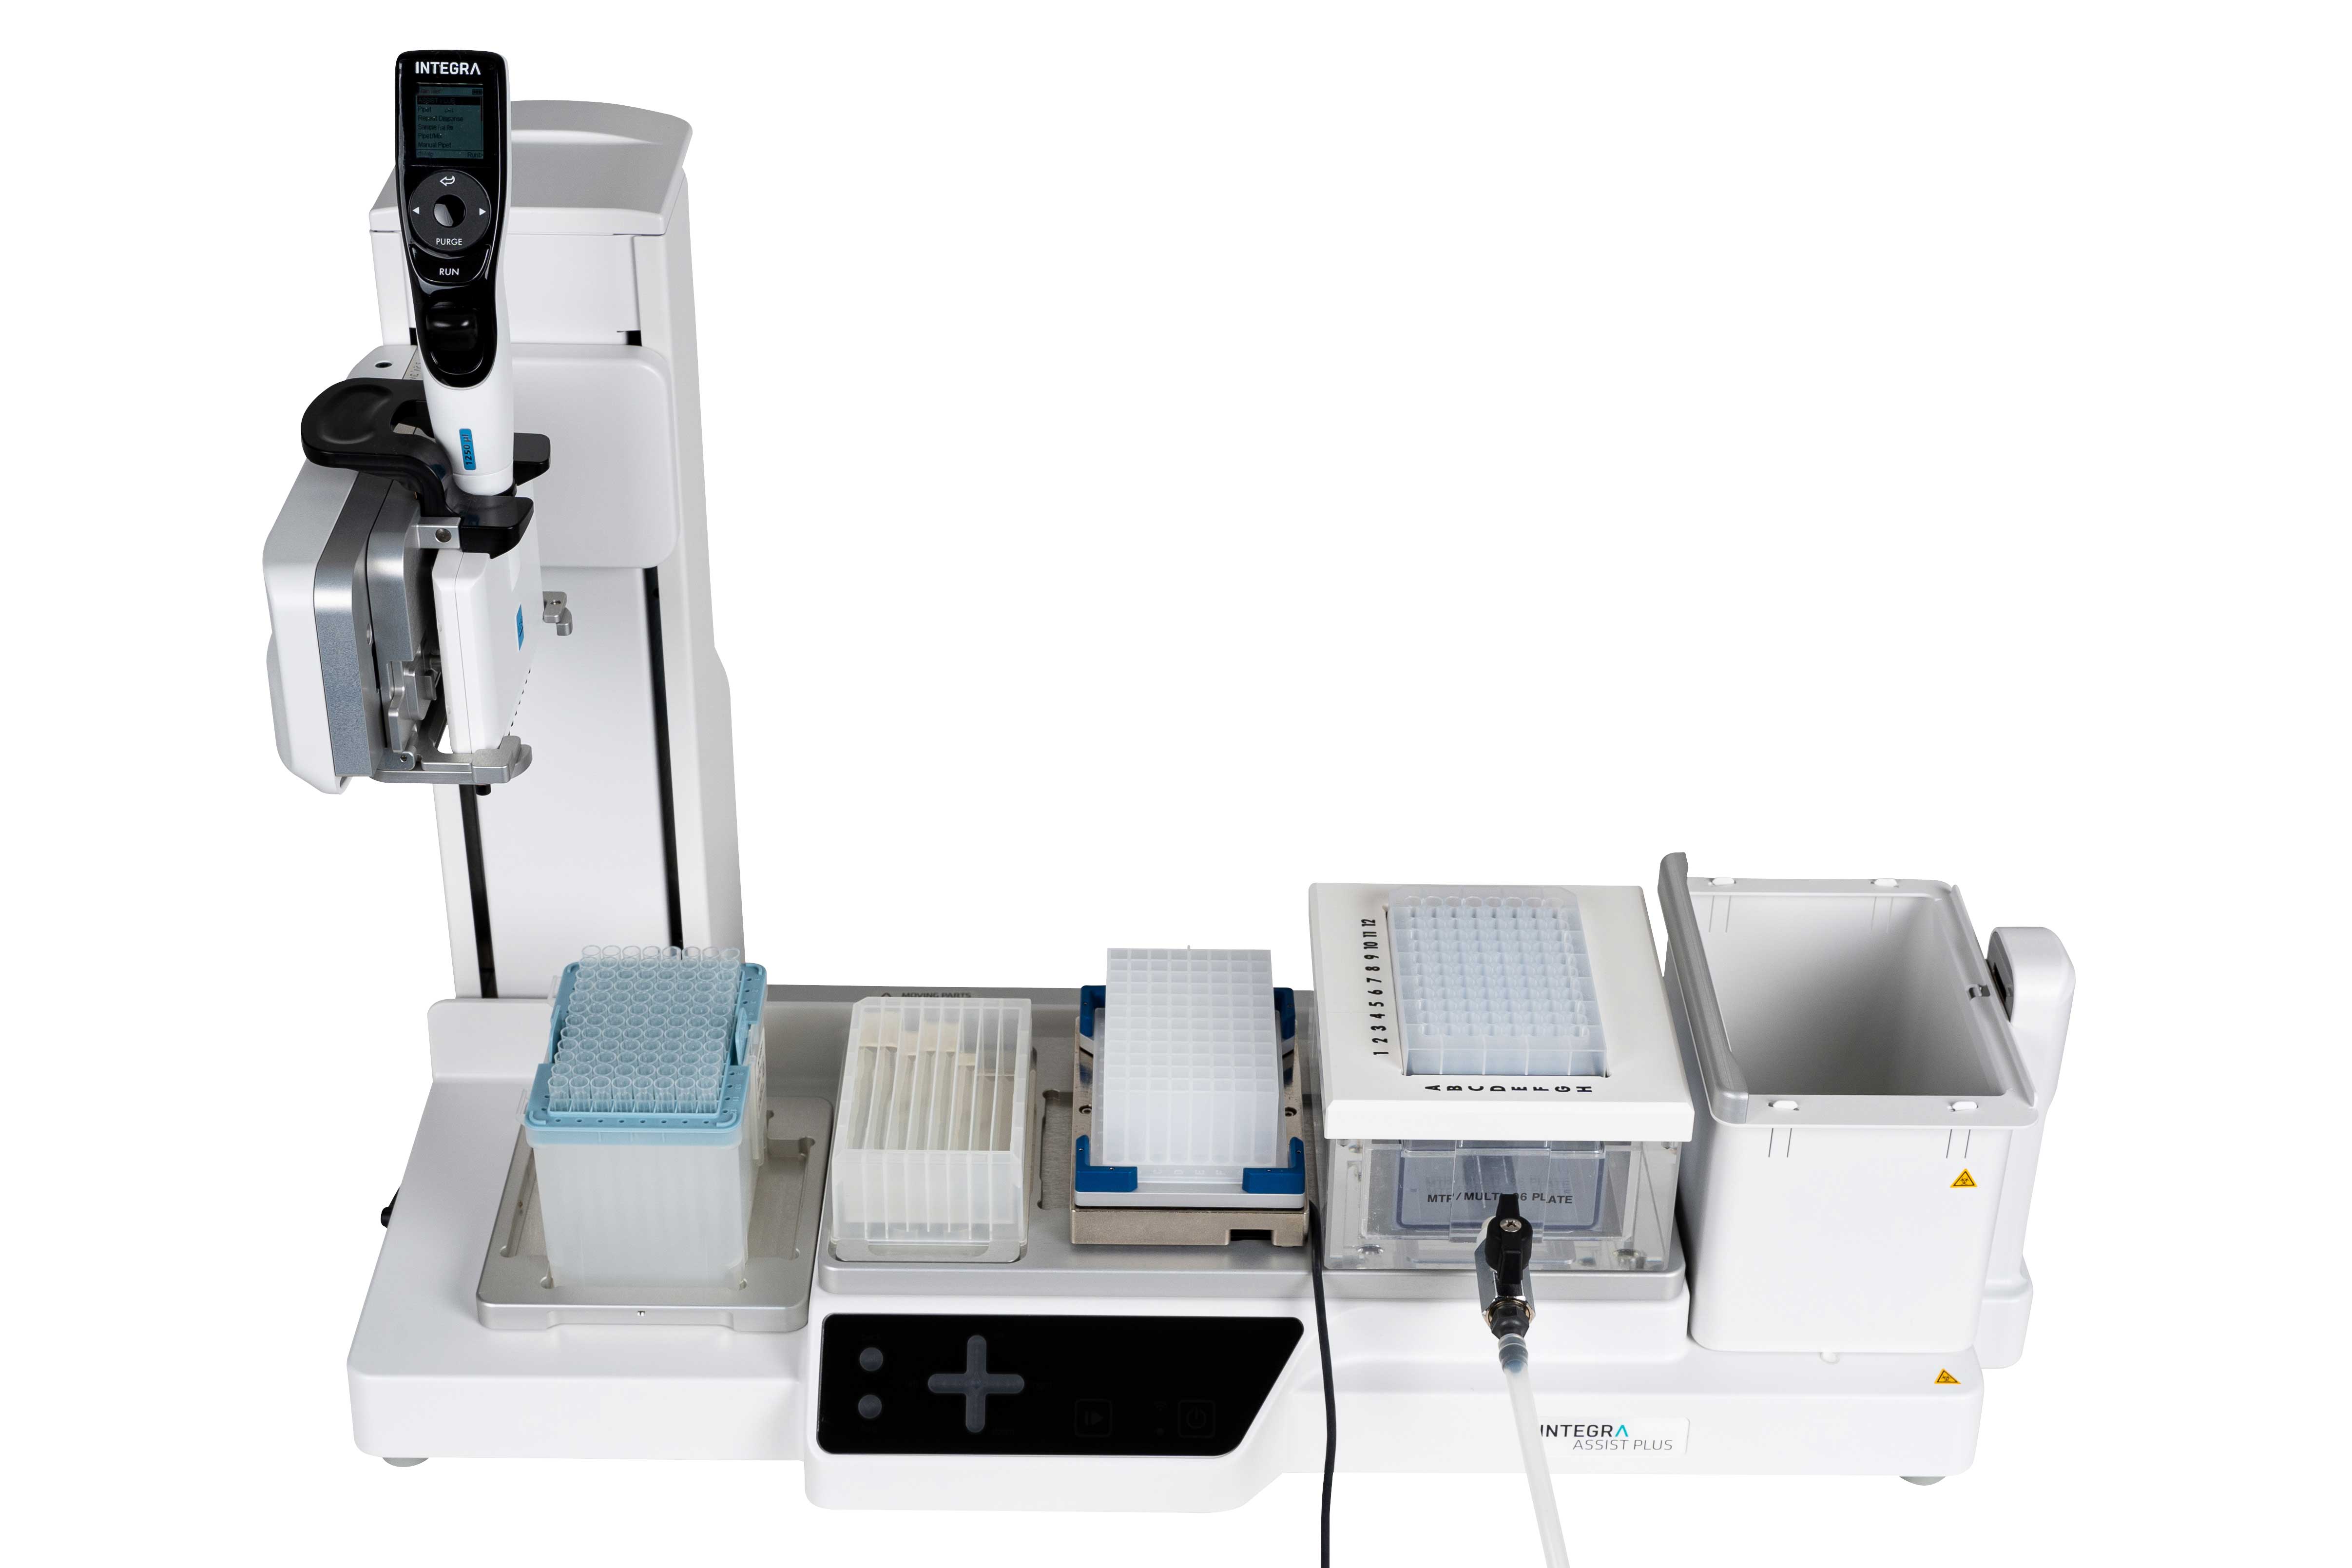 ASSIST PLUS pipetting robot with an 8 row reagent reservoir, a 96 well plate on the Teleshake and MACHEREY NAGEL NucleoVac 96 Vacuum Manifold.